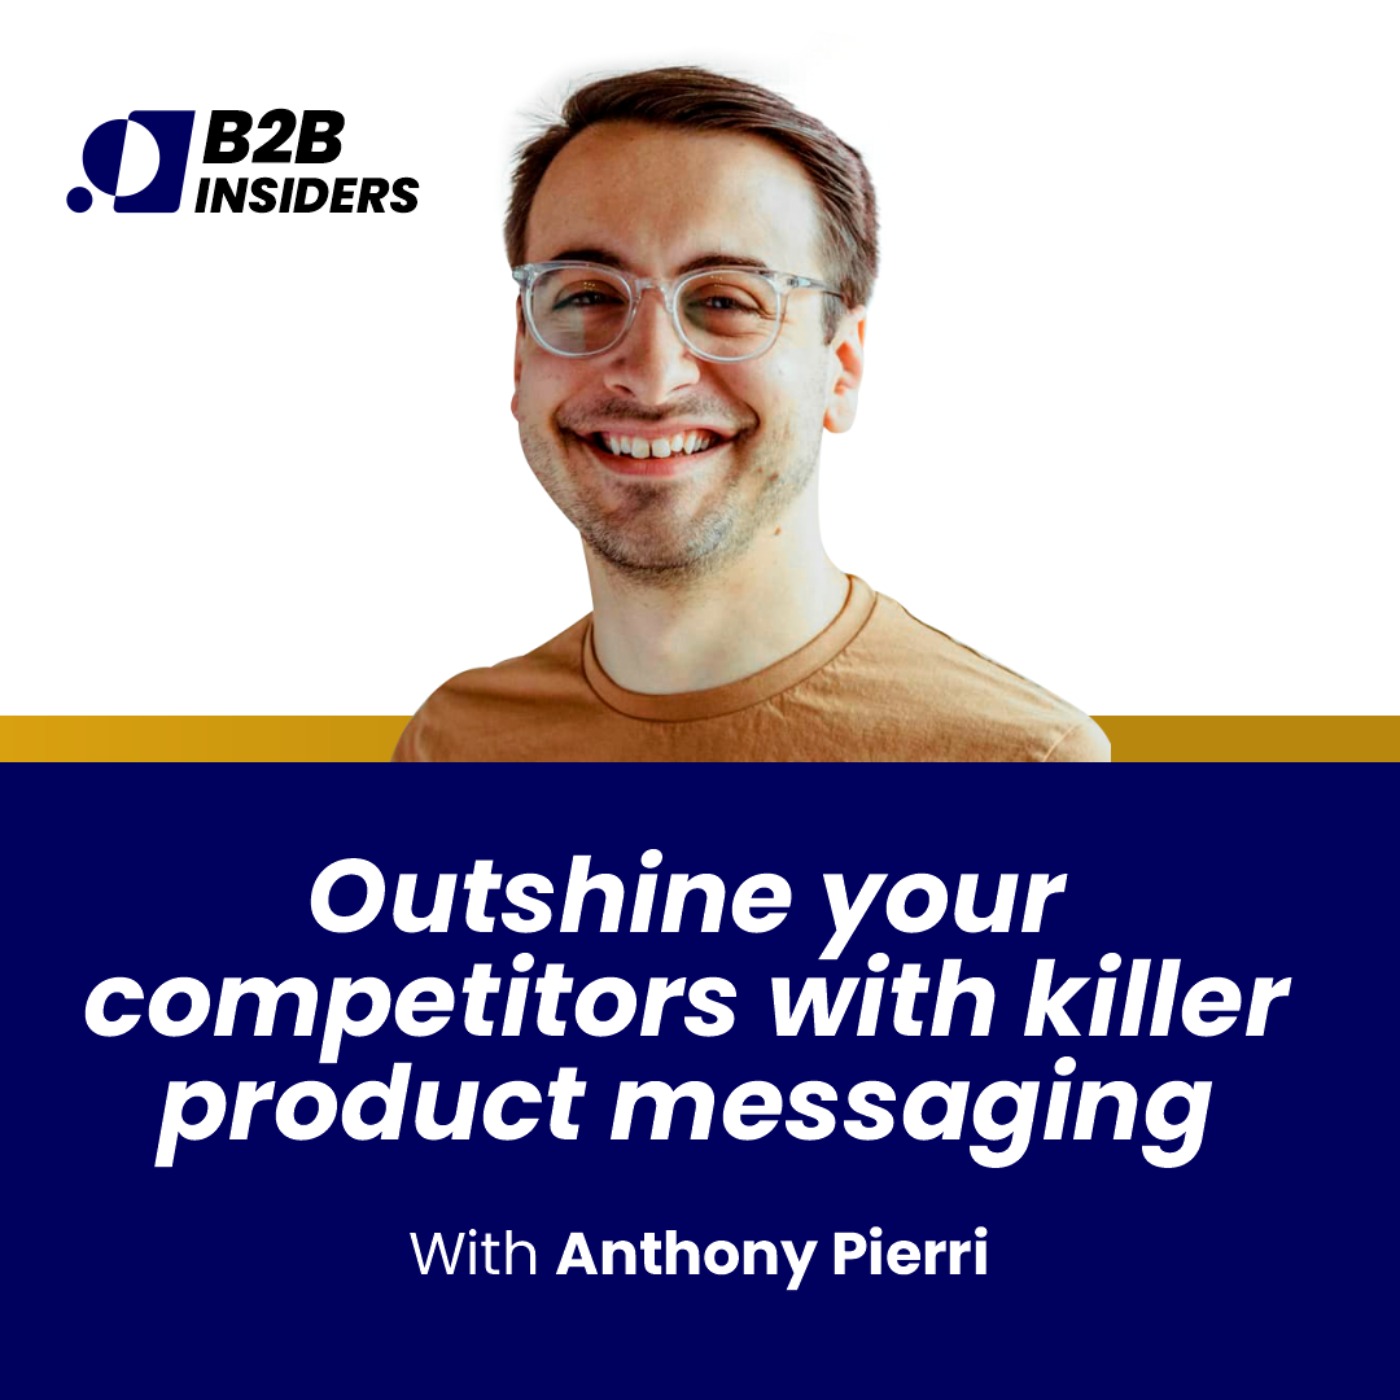 #9 - Outshine your competitors with killer product messaging - Anthony Pierri